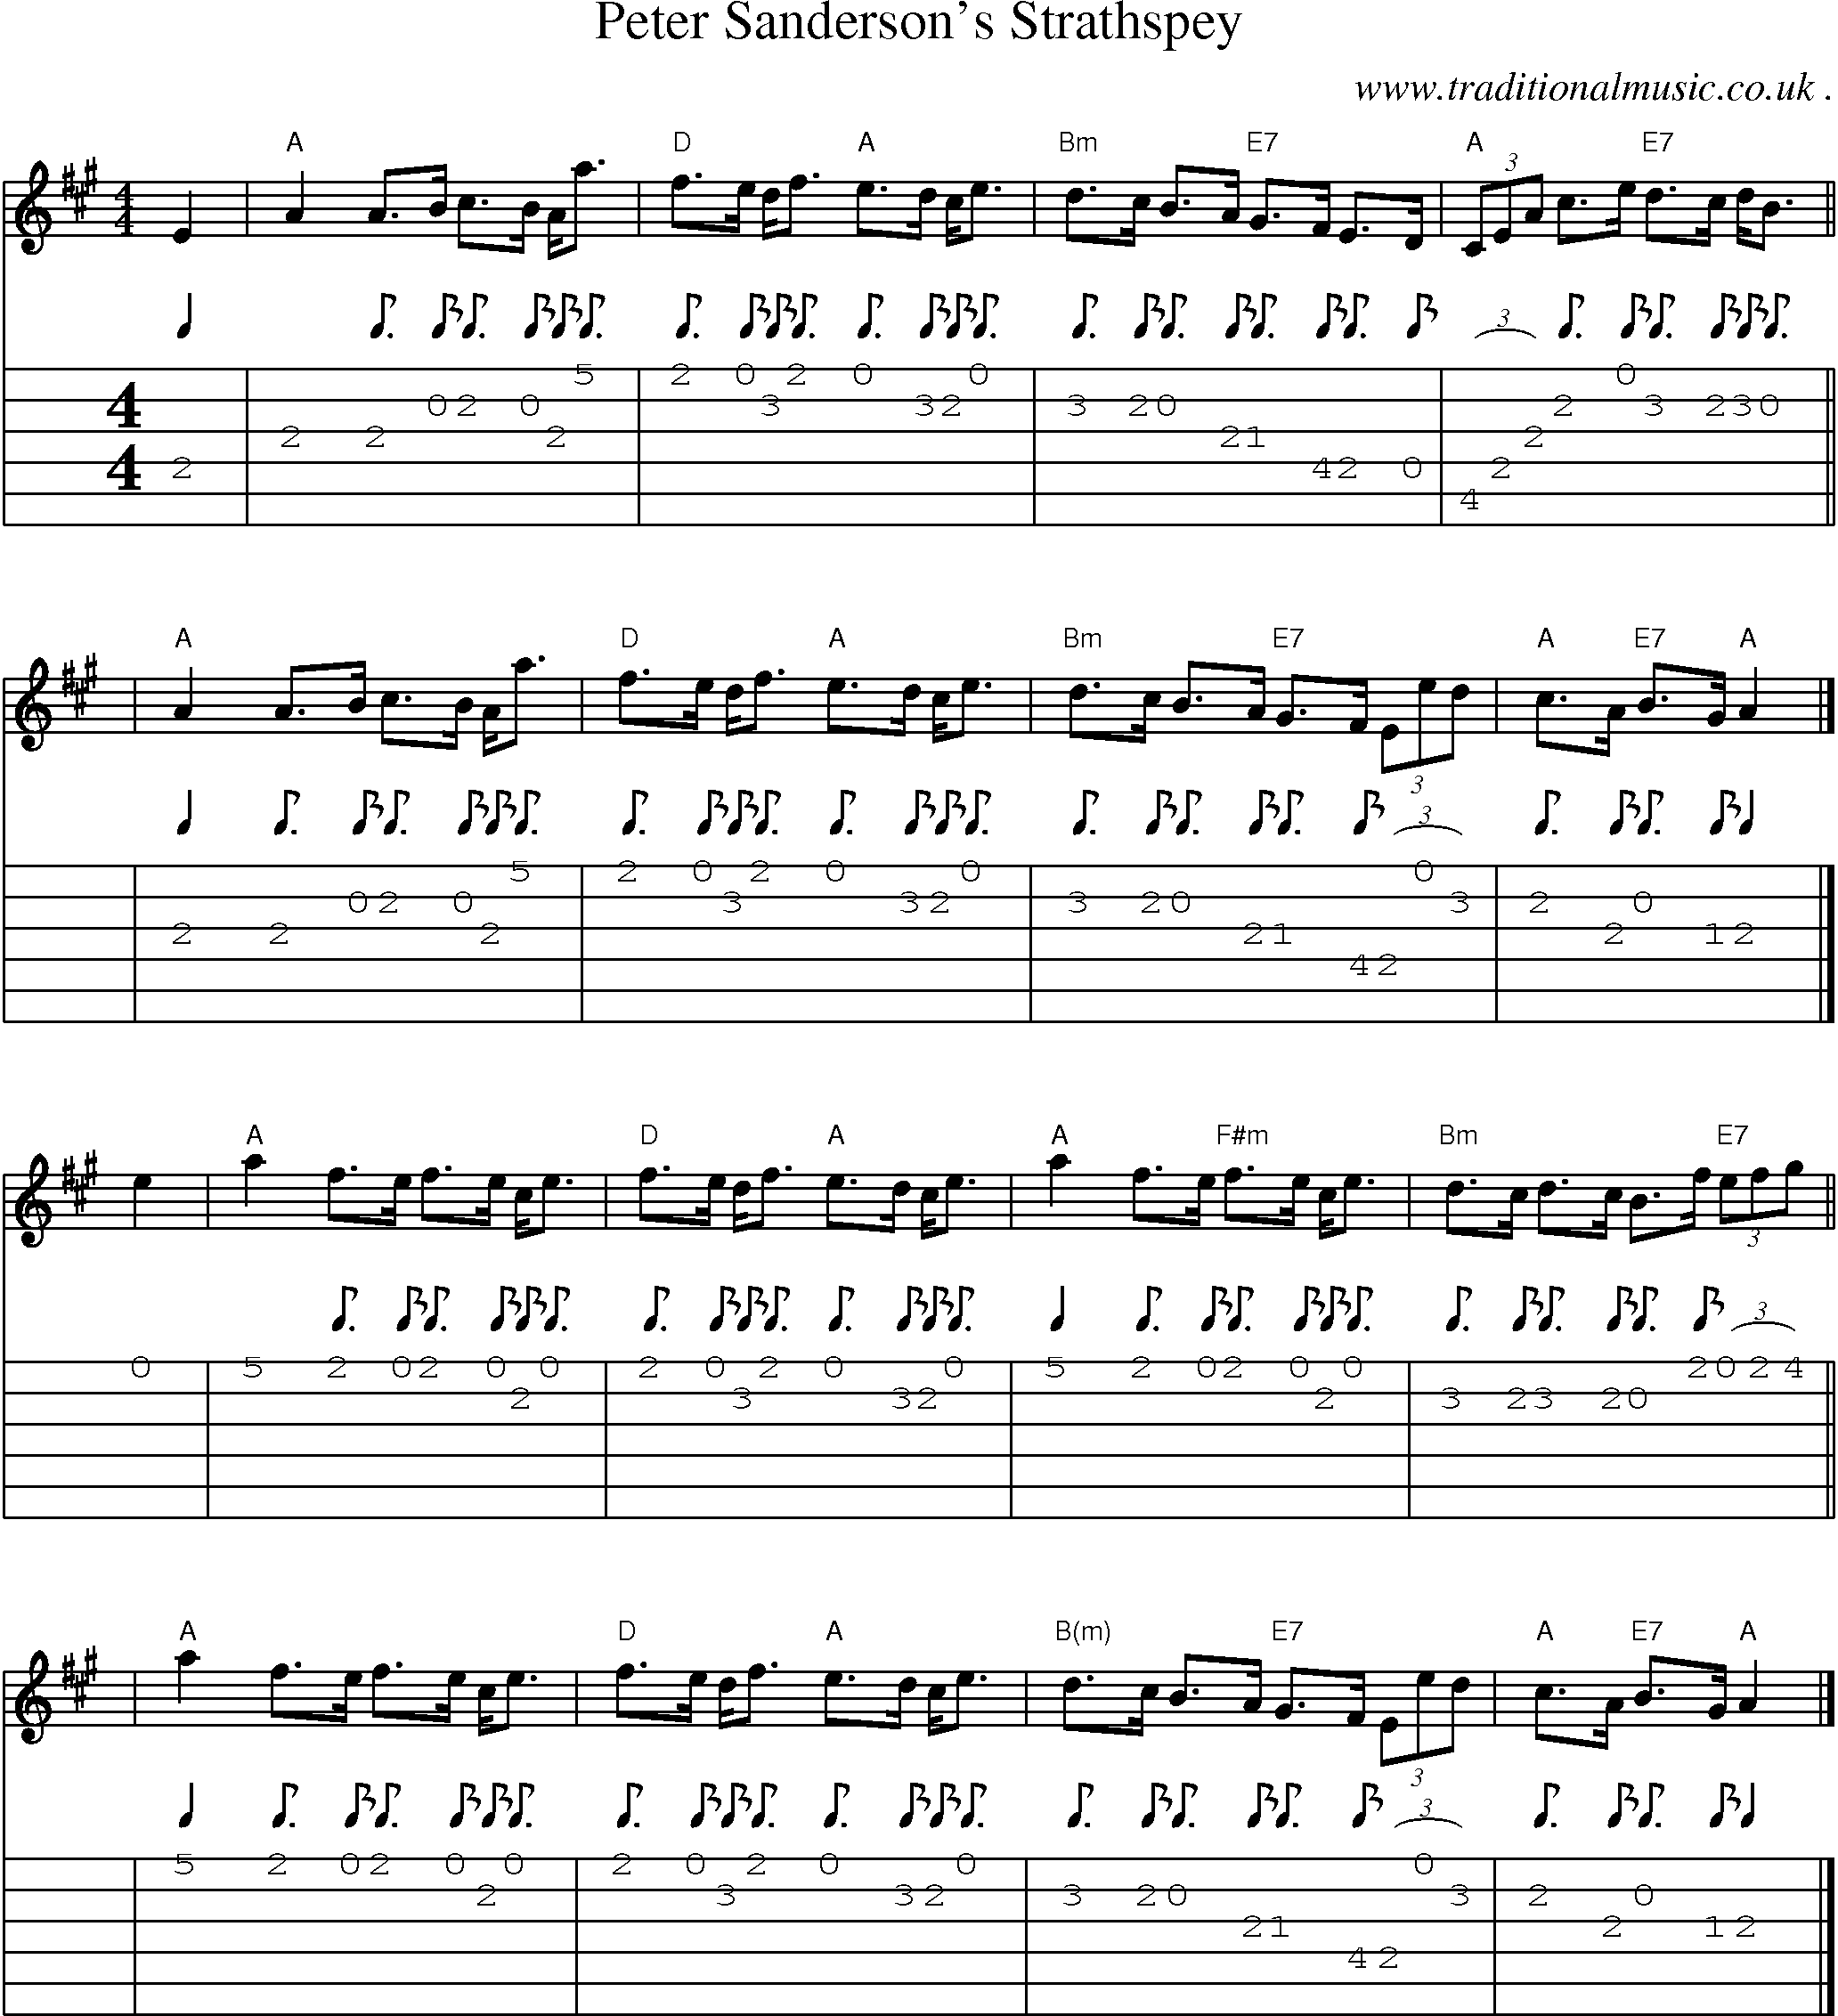 Sheet-music  score, Chords and Guitar Tabs for Peter Sandersons Strathspey